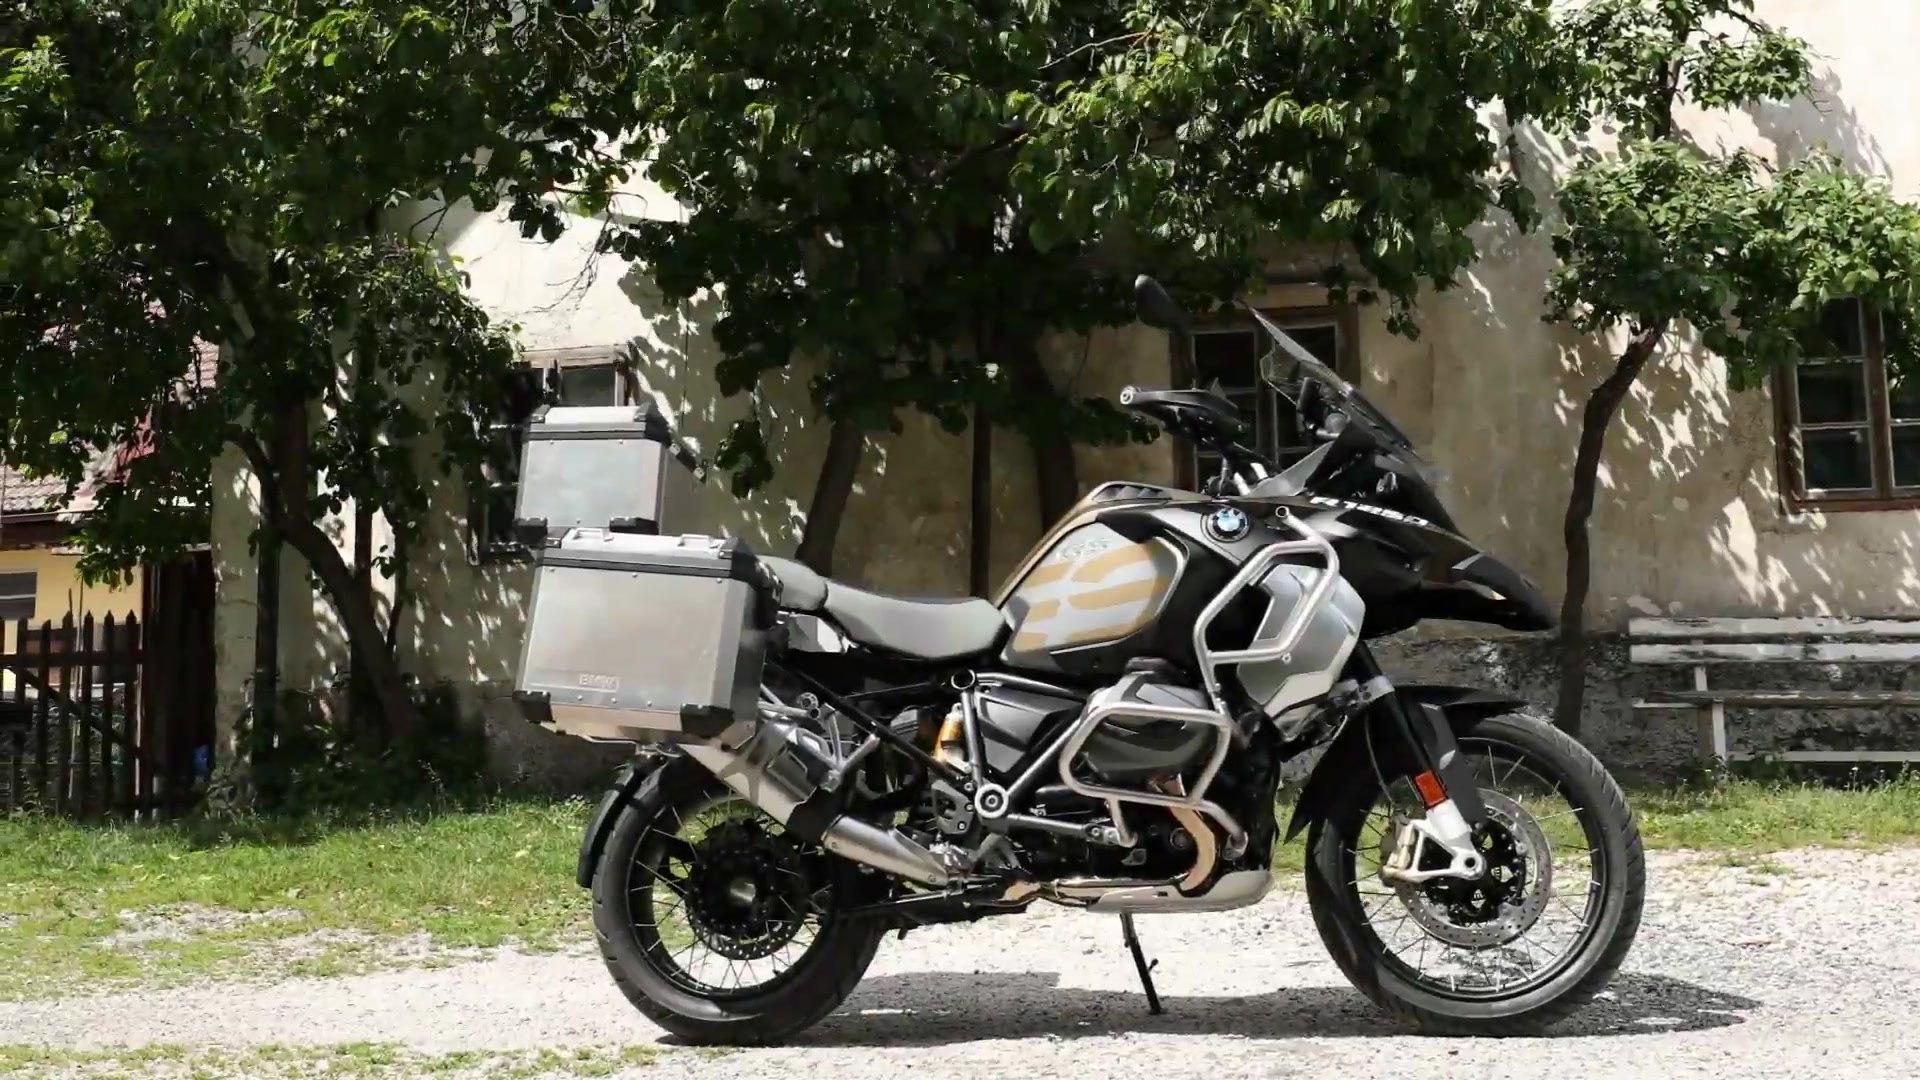 The new BMW R 1250 GS Adventure